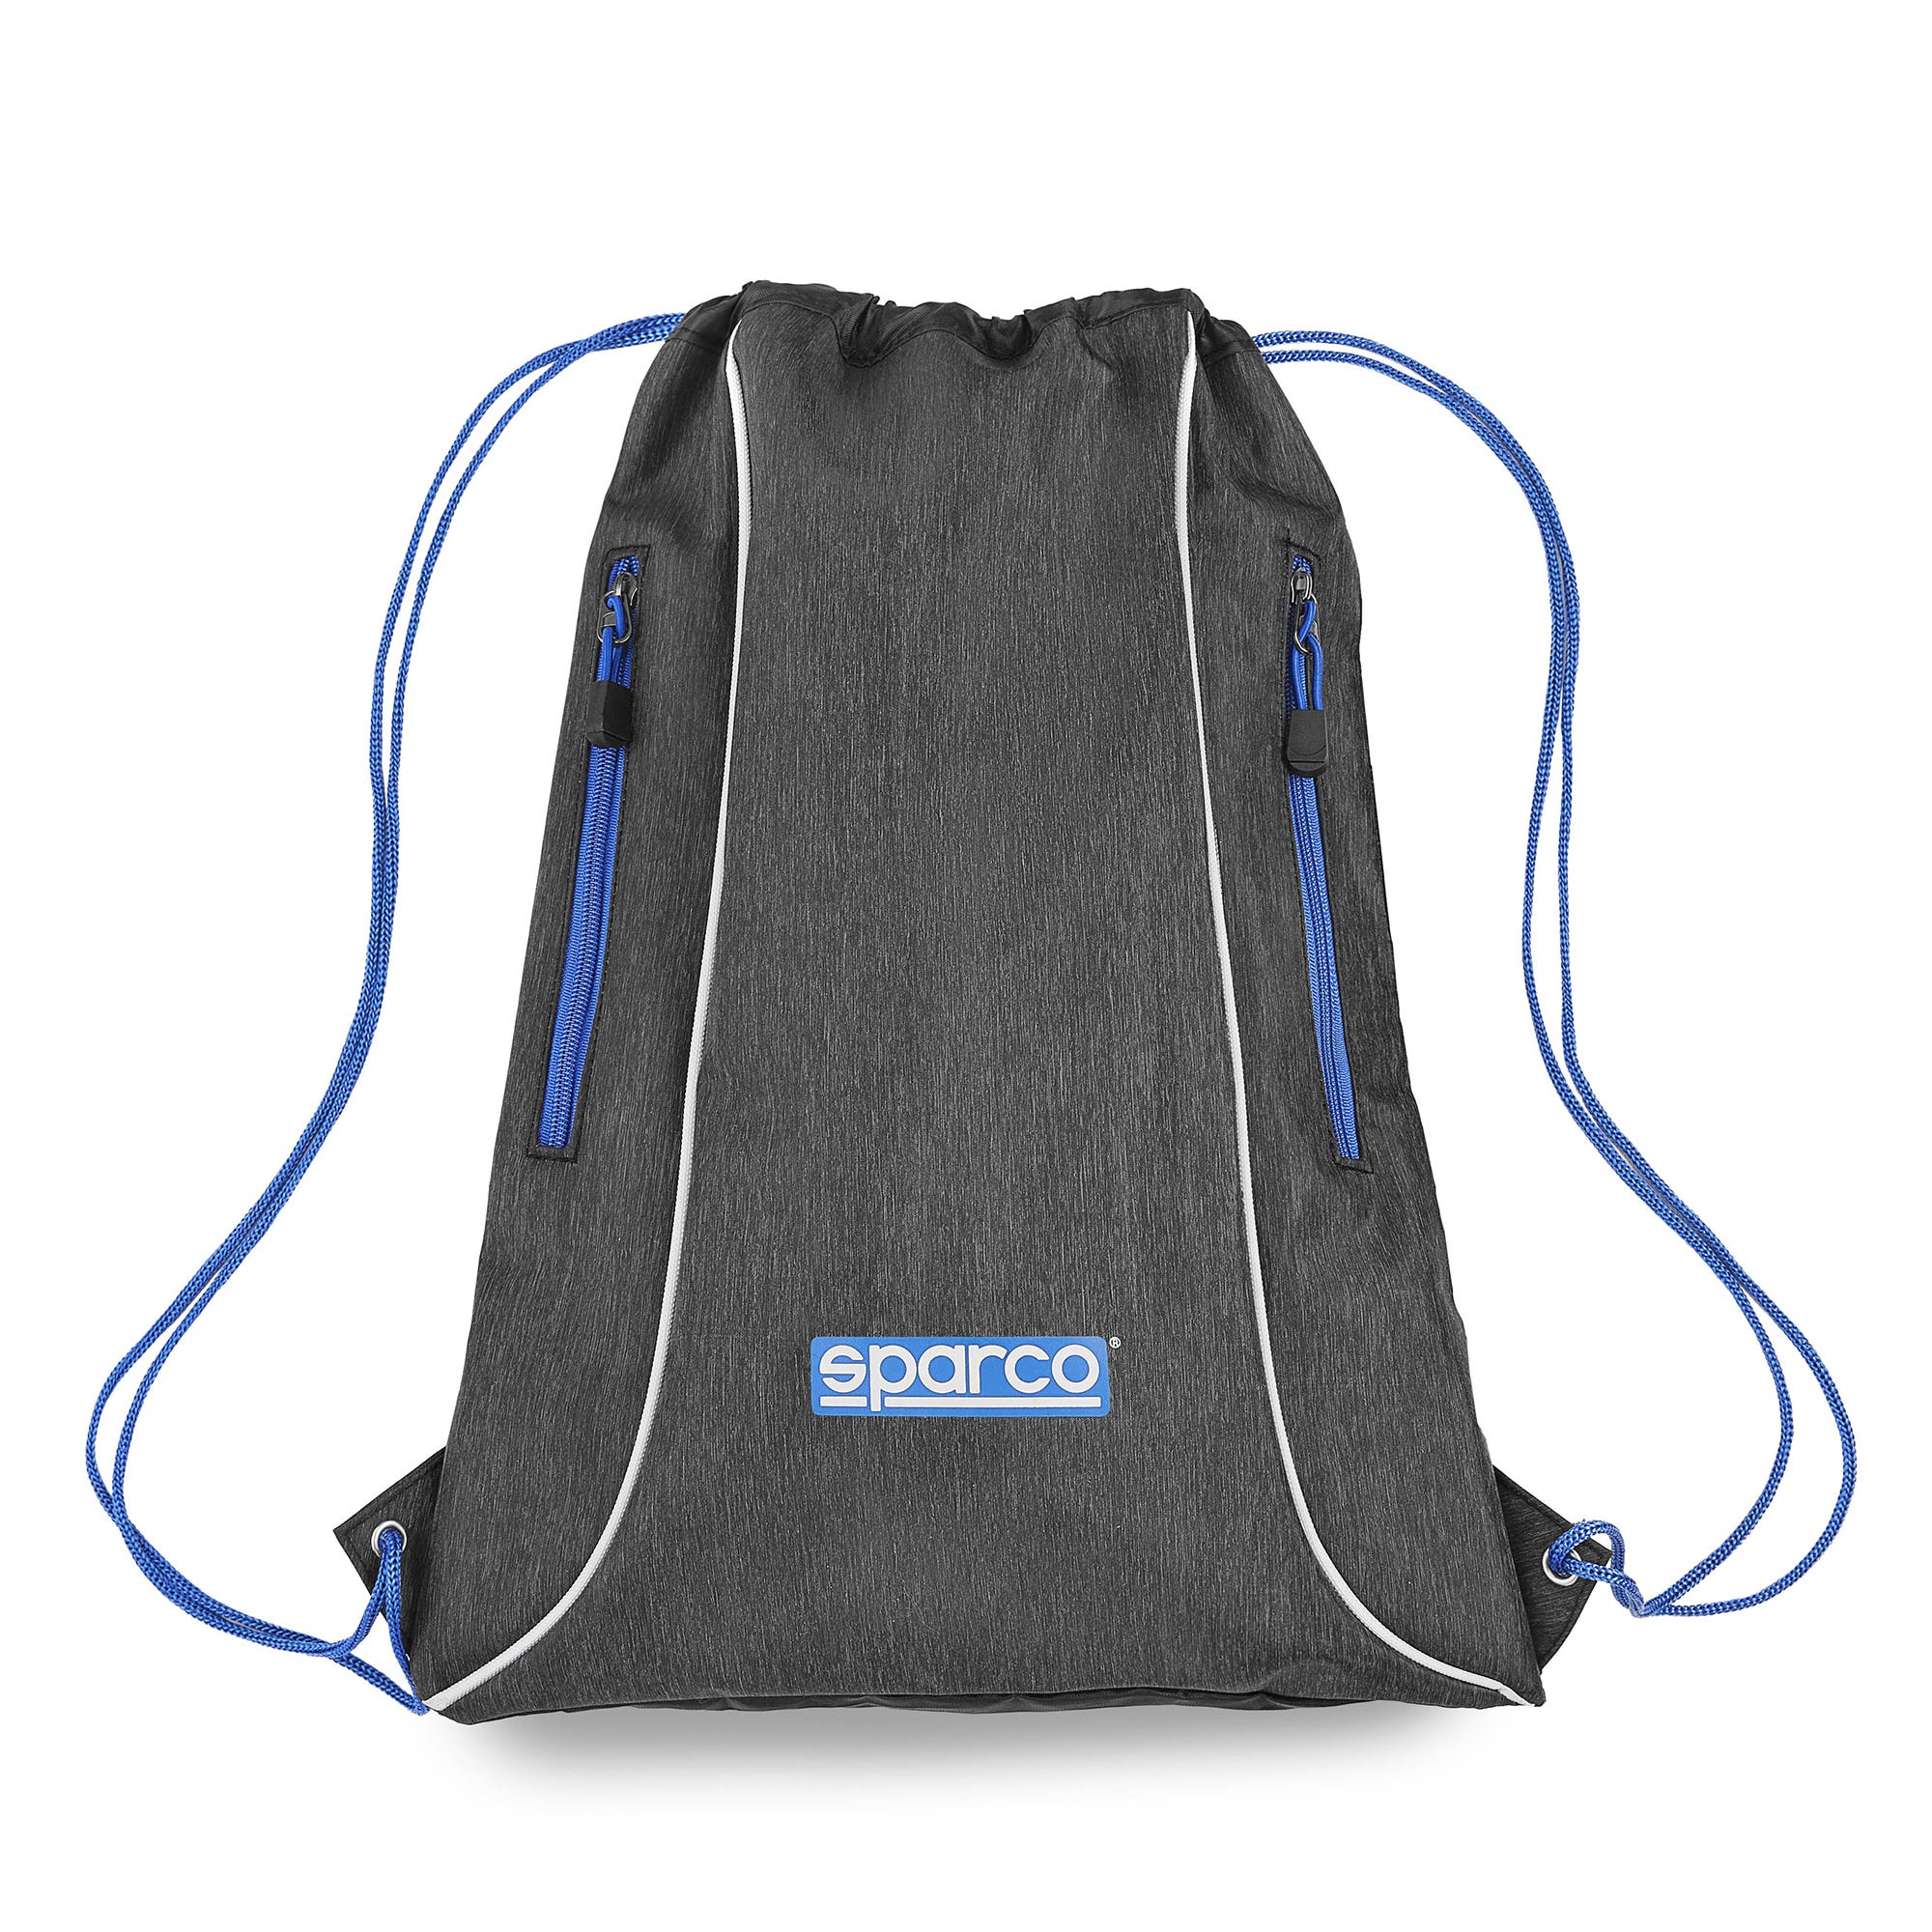 SPORT BACKPACK WITH SIDE POCKETS - Sparco Shop